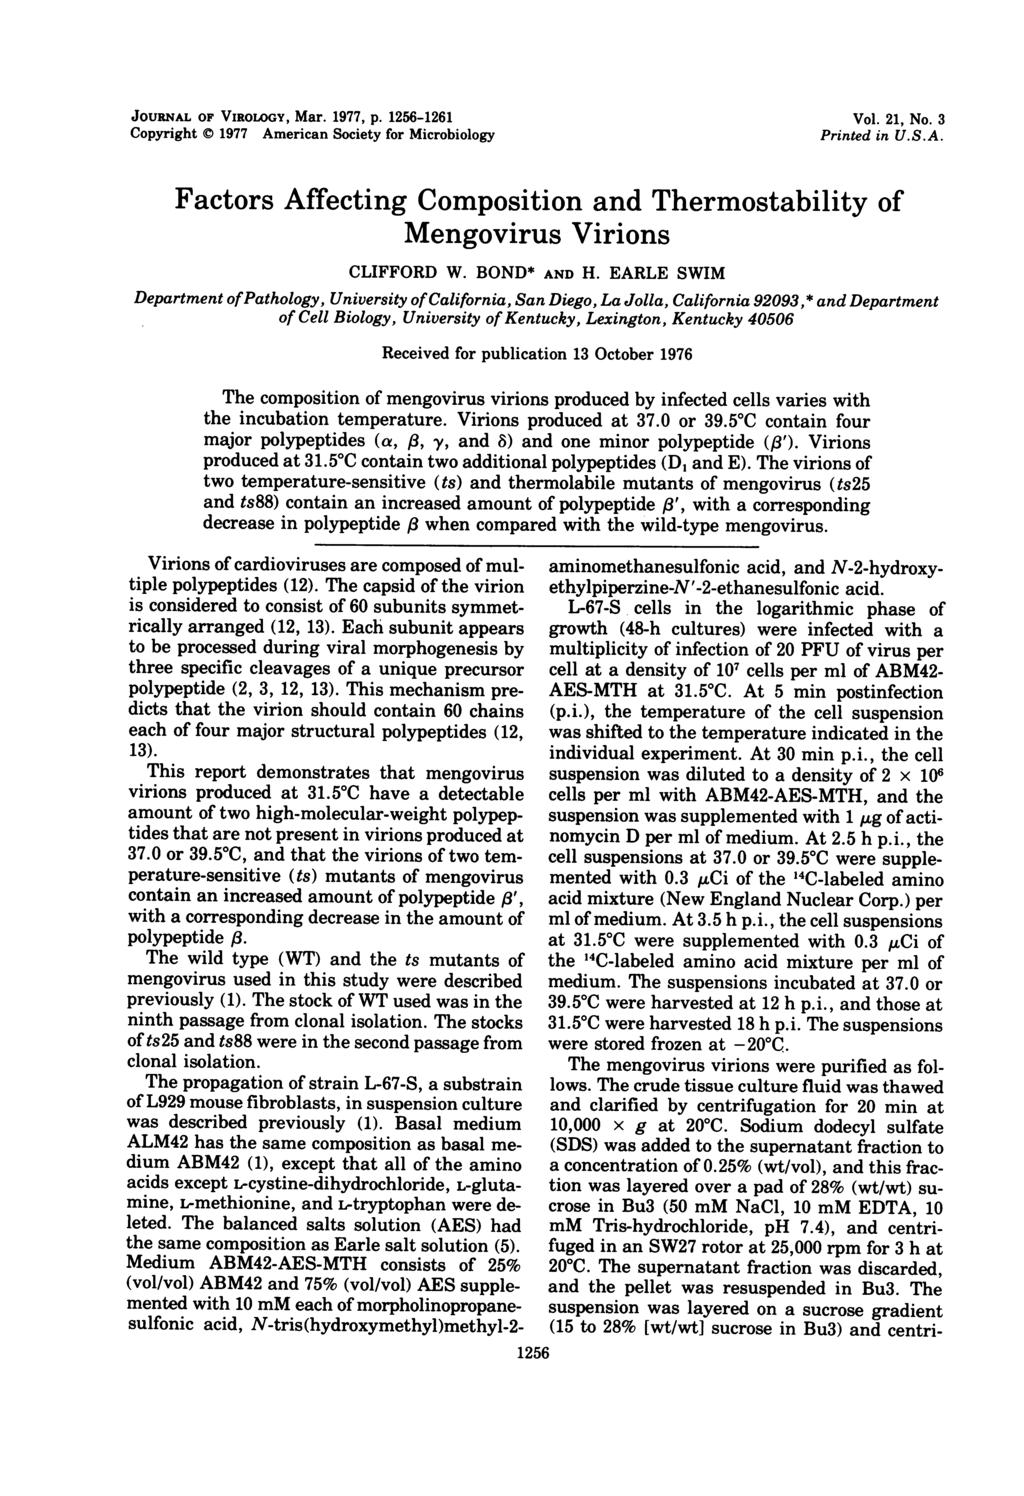 JOURNAL OF VIROLOGY, Mar. 1977, p. 1256-1261 Copyright 1977 American Society for Microbiology Vol. 21, No. 3 Printed in U.S.A. Factors Affecting Composition and Thermostability of Mengovirus Virions CLIFFORD W.